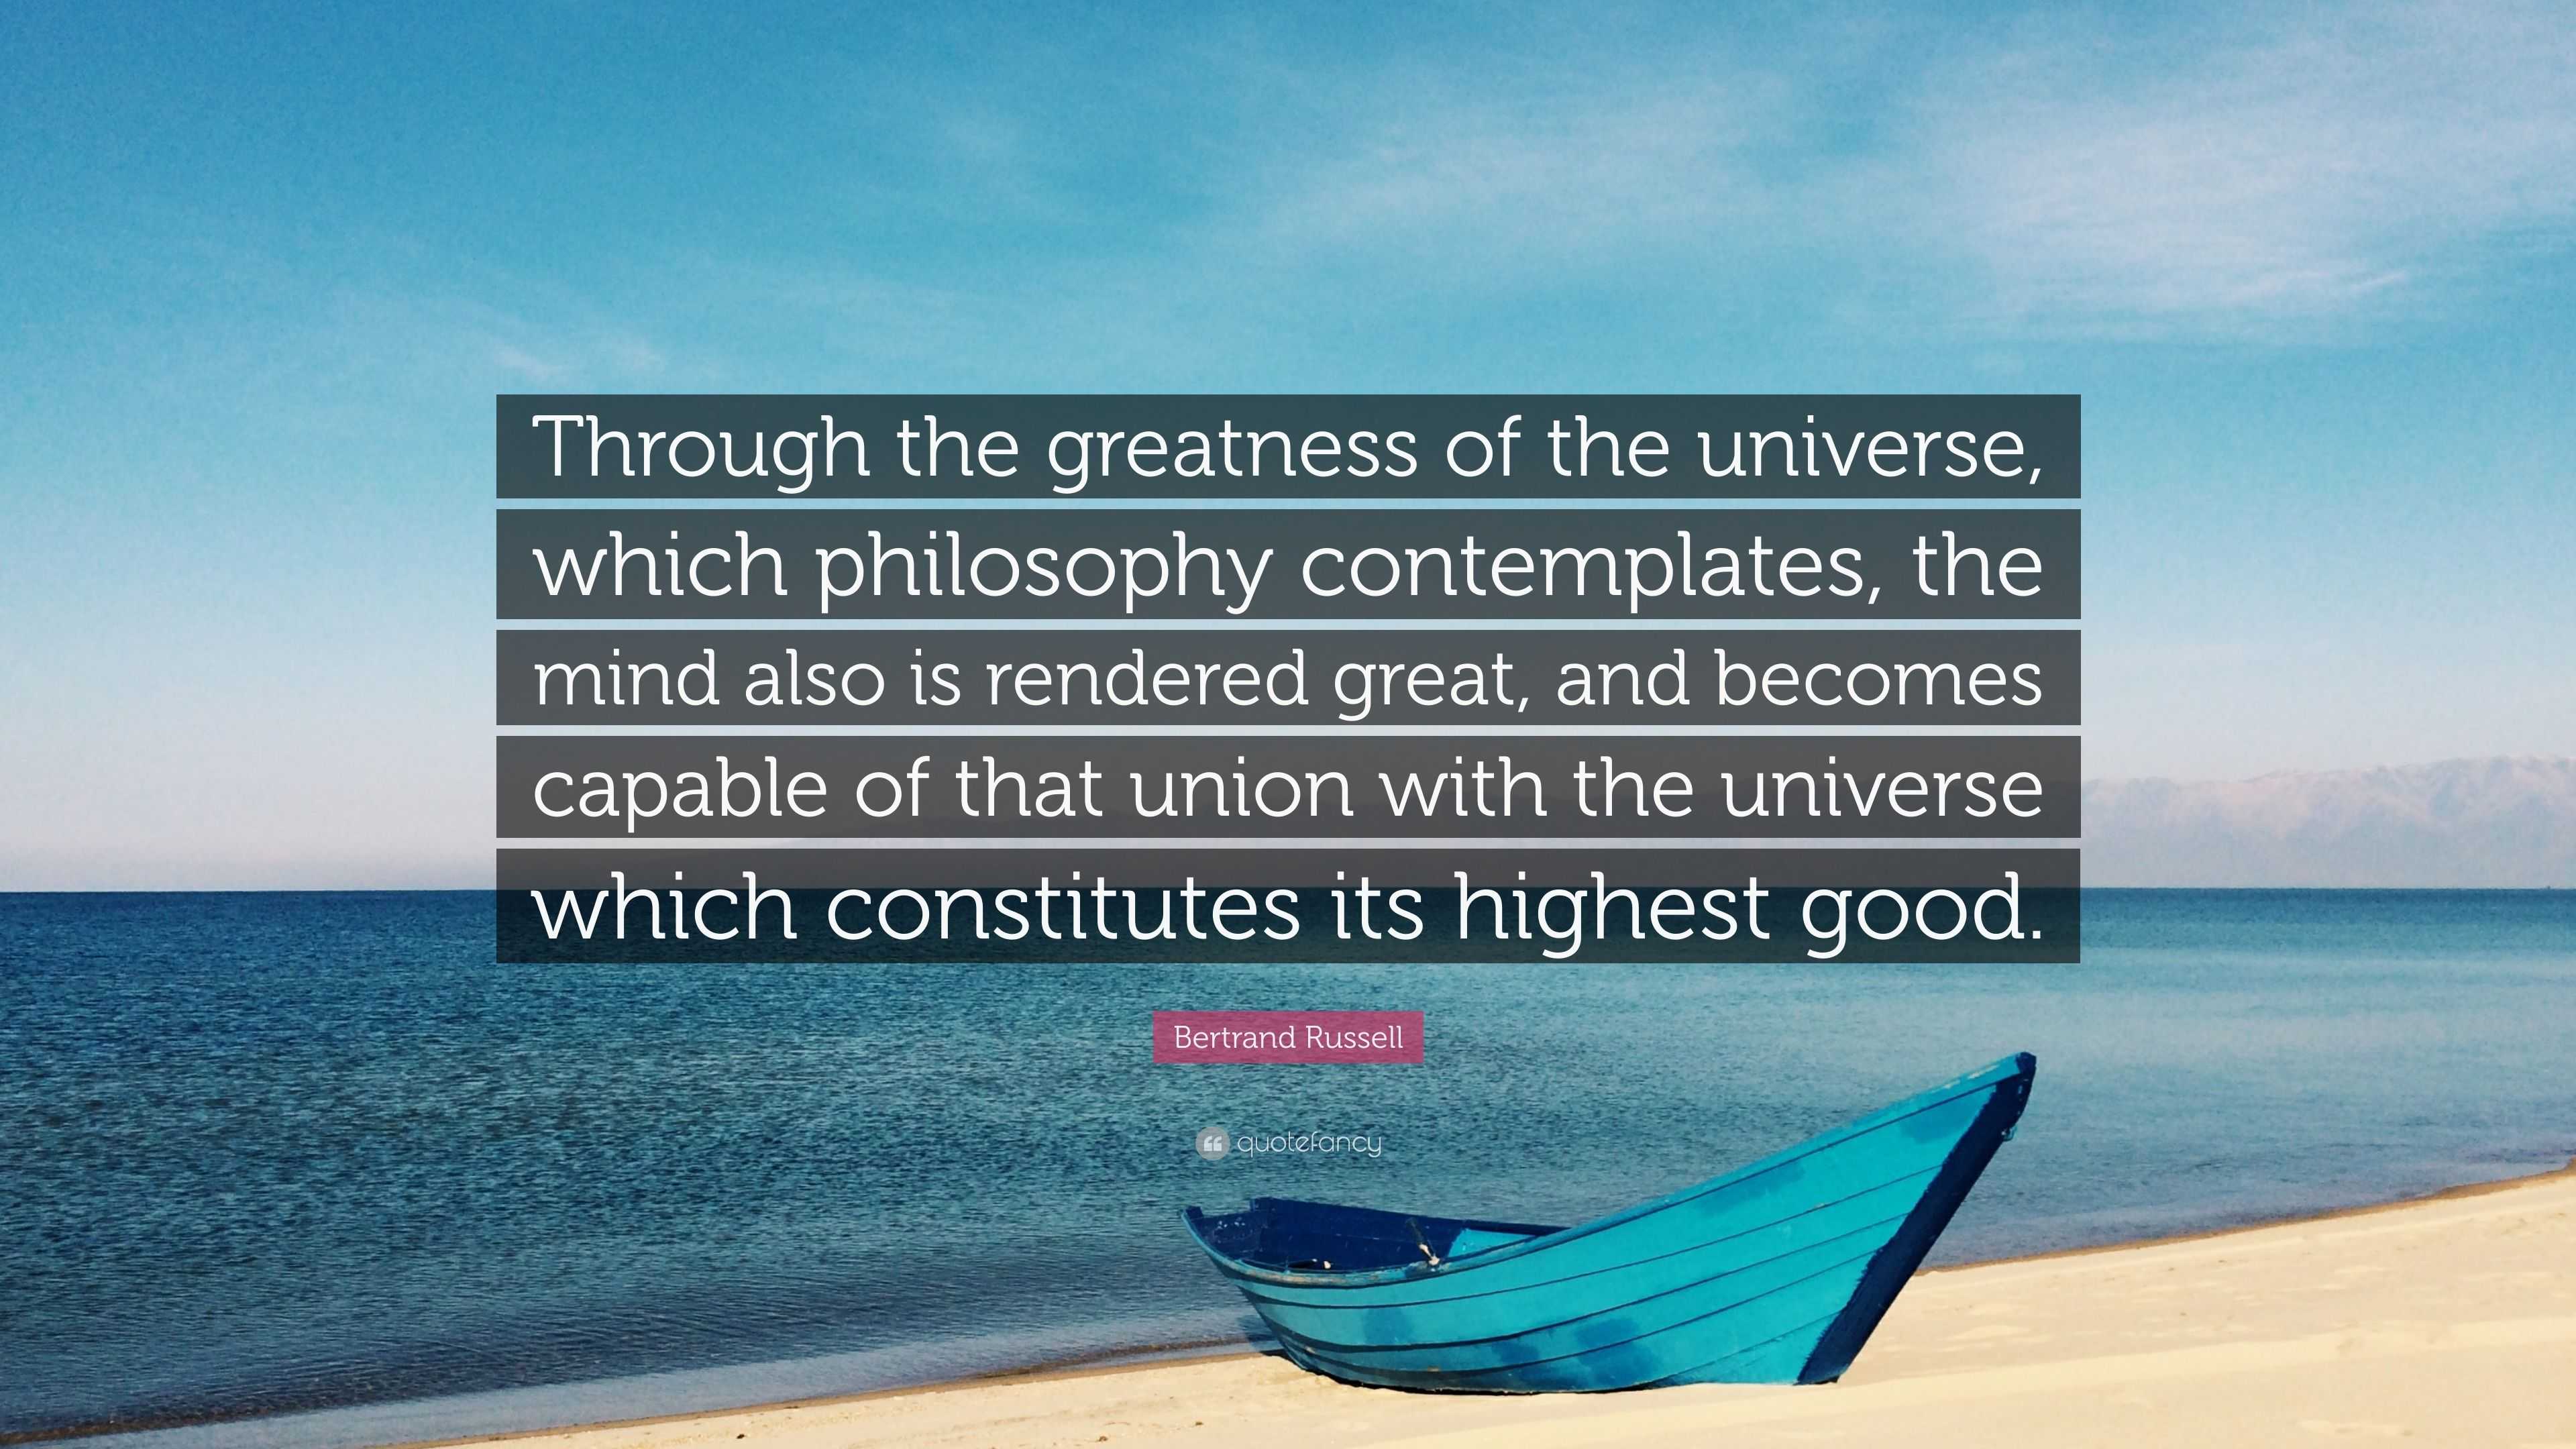 Bertrand Russell Quote: “Through the greatness of the universe, which ...